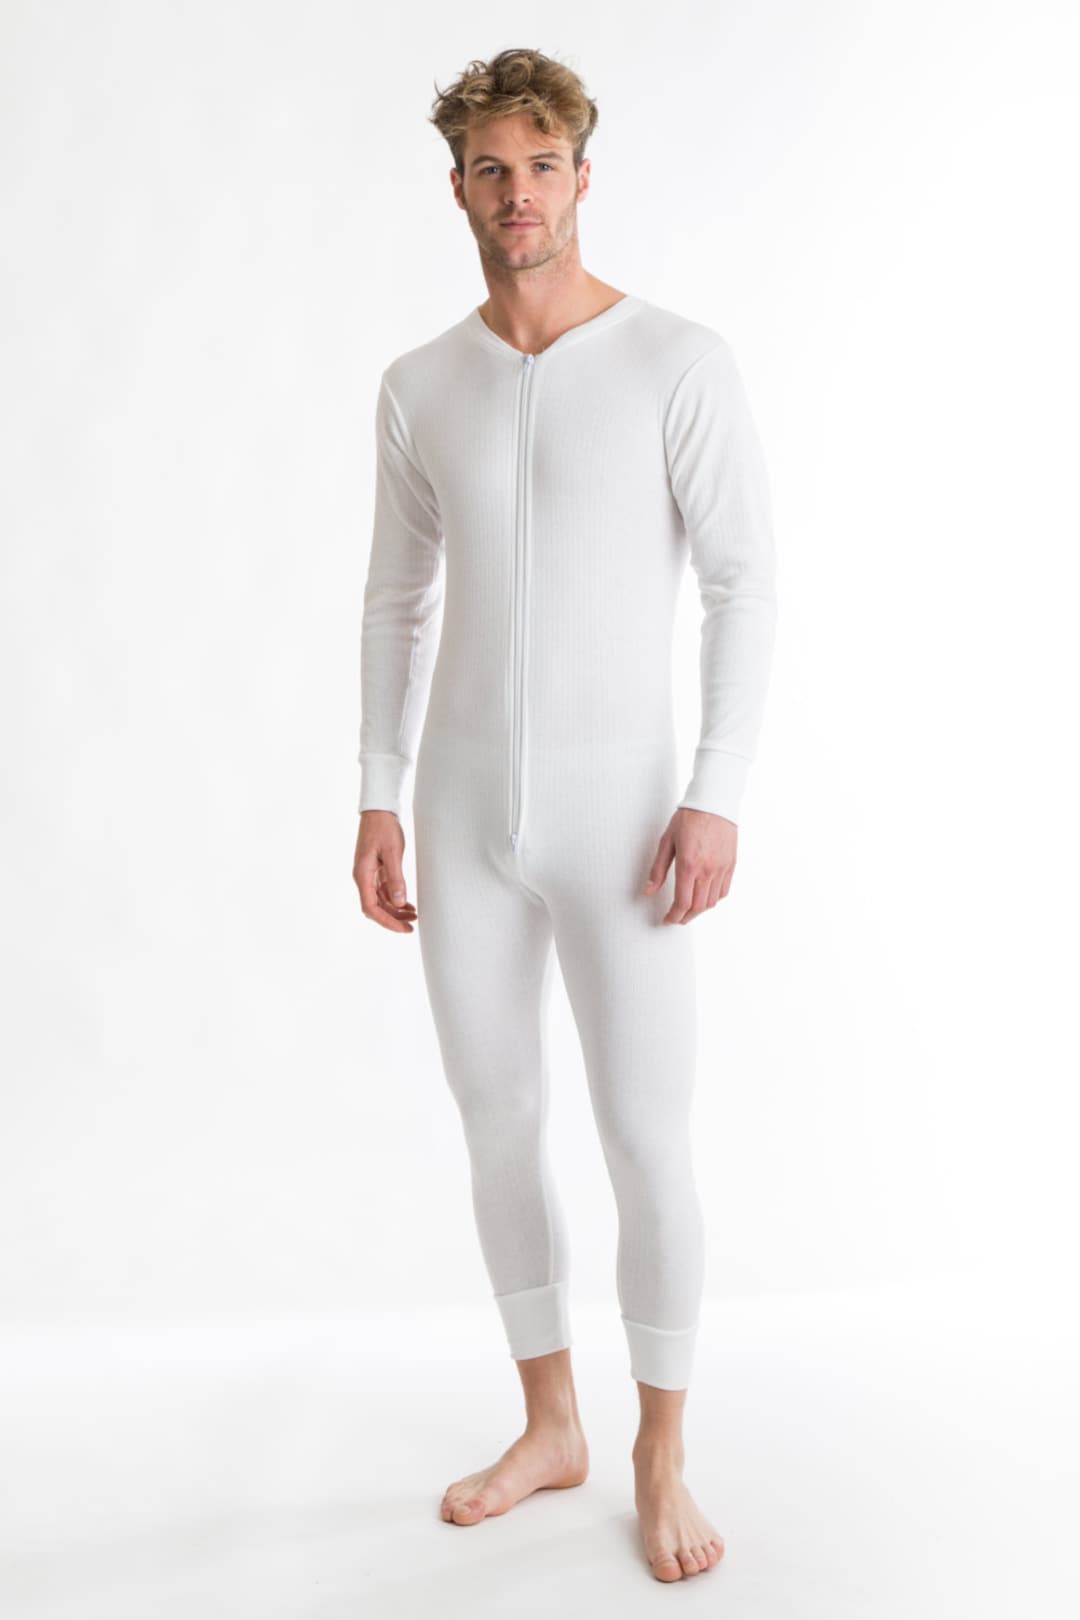 OCTAVE® Mens Thermal Underwear All in One Union Suit / Thermal Body Suit -   Ireland